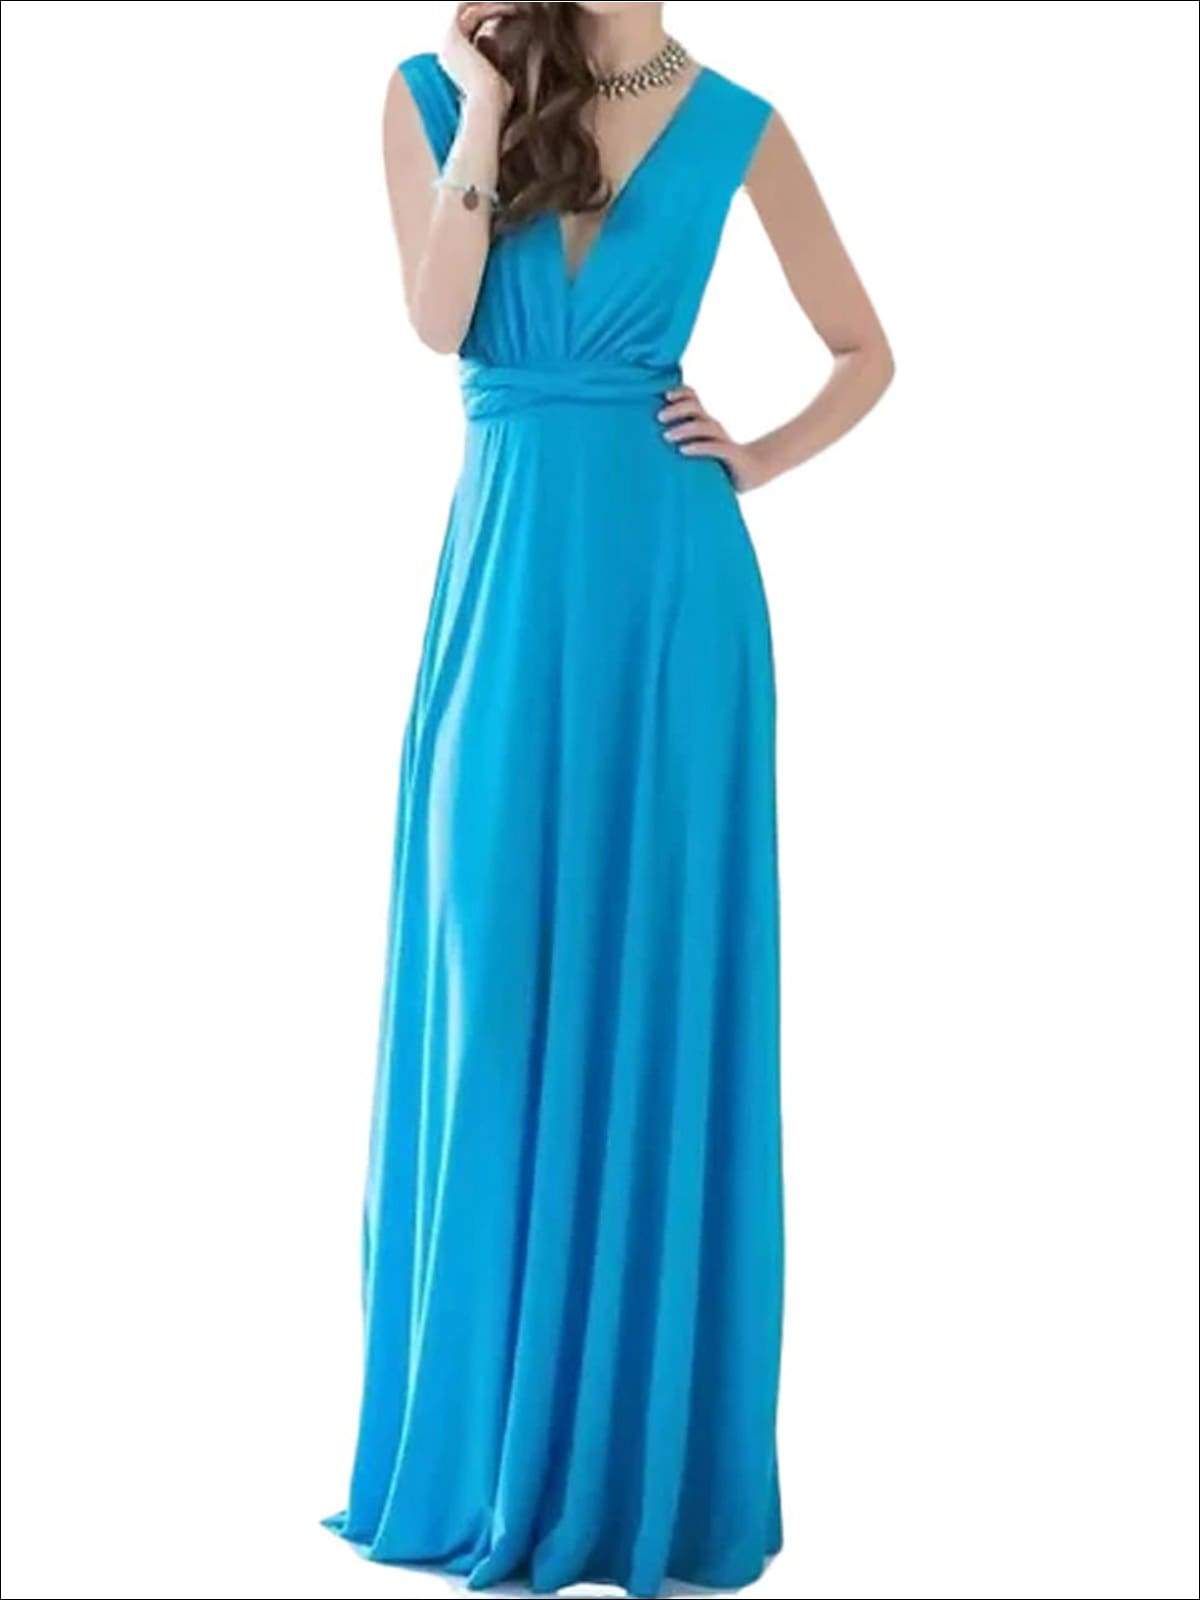 Womens Fit And Flare Infinity Convertible Wrap Dress (Multicolor Options) - Blue / S - Womens Dresses